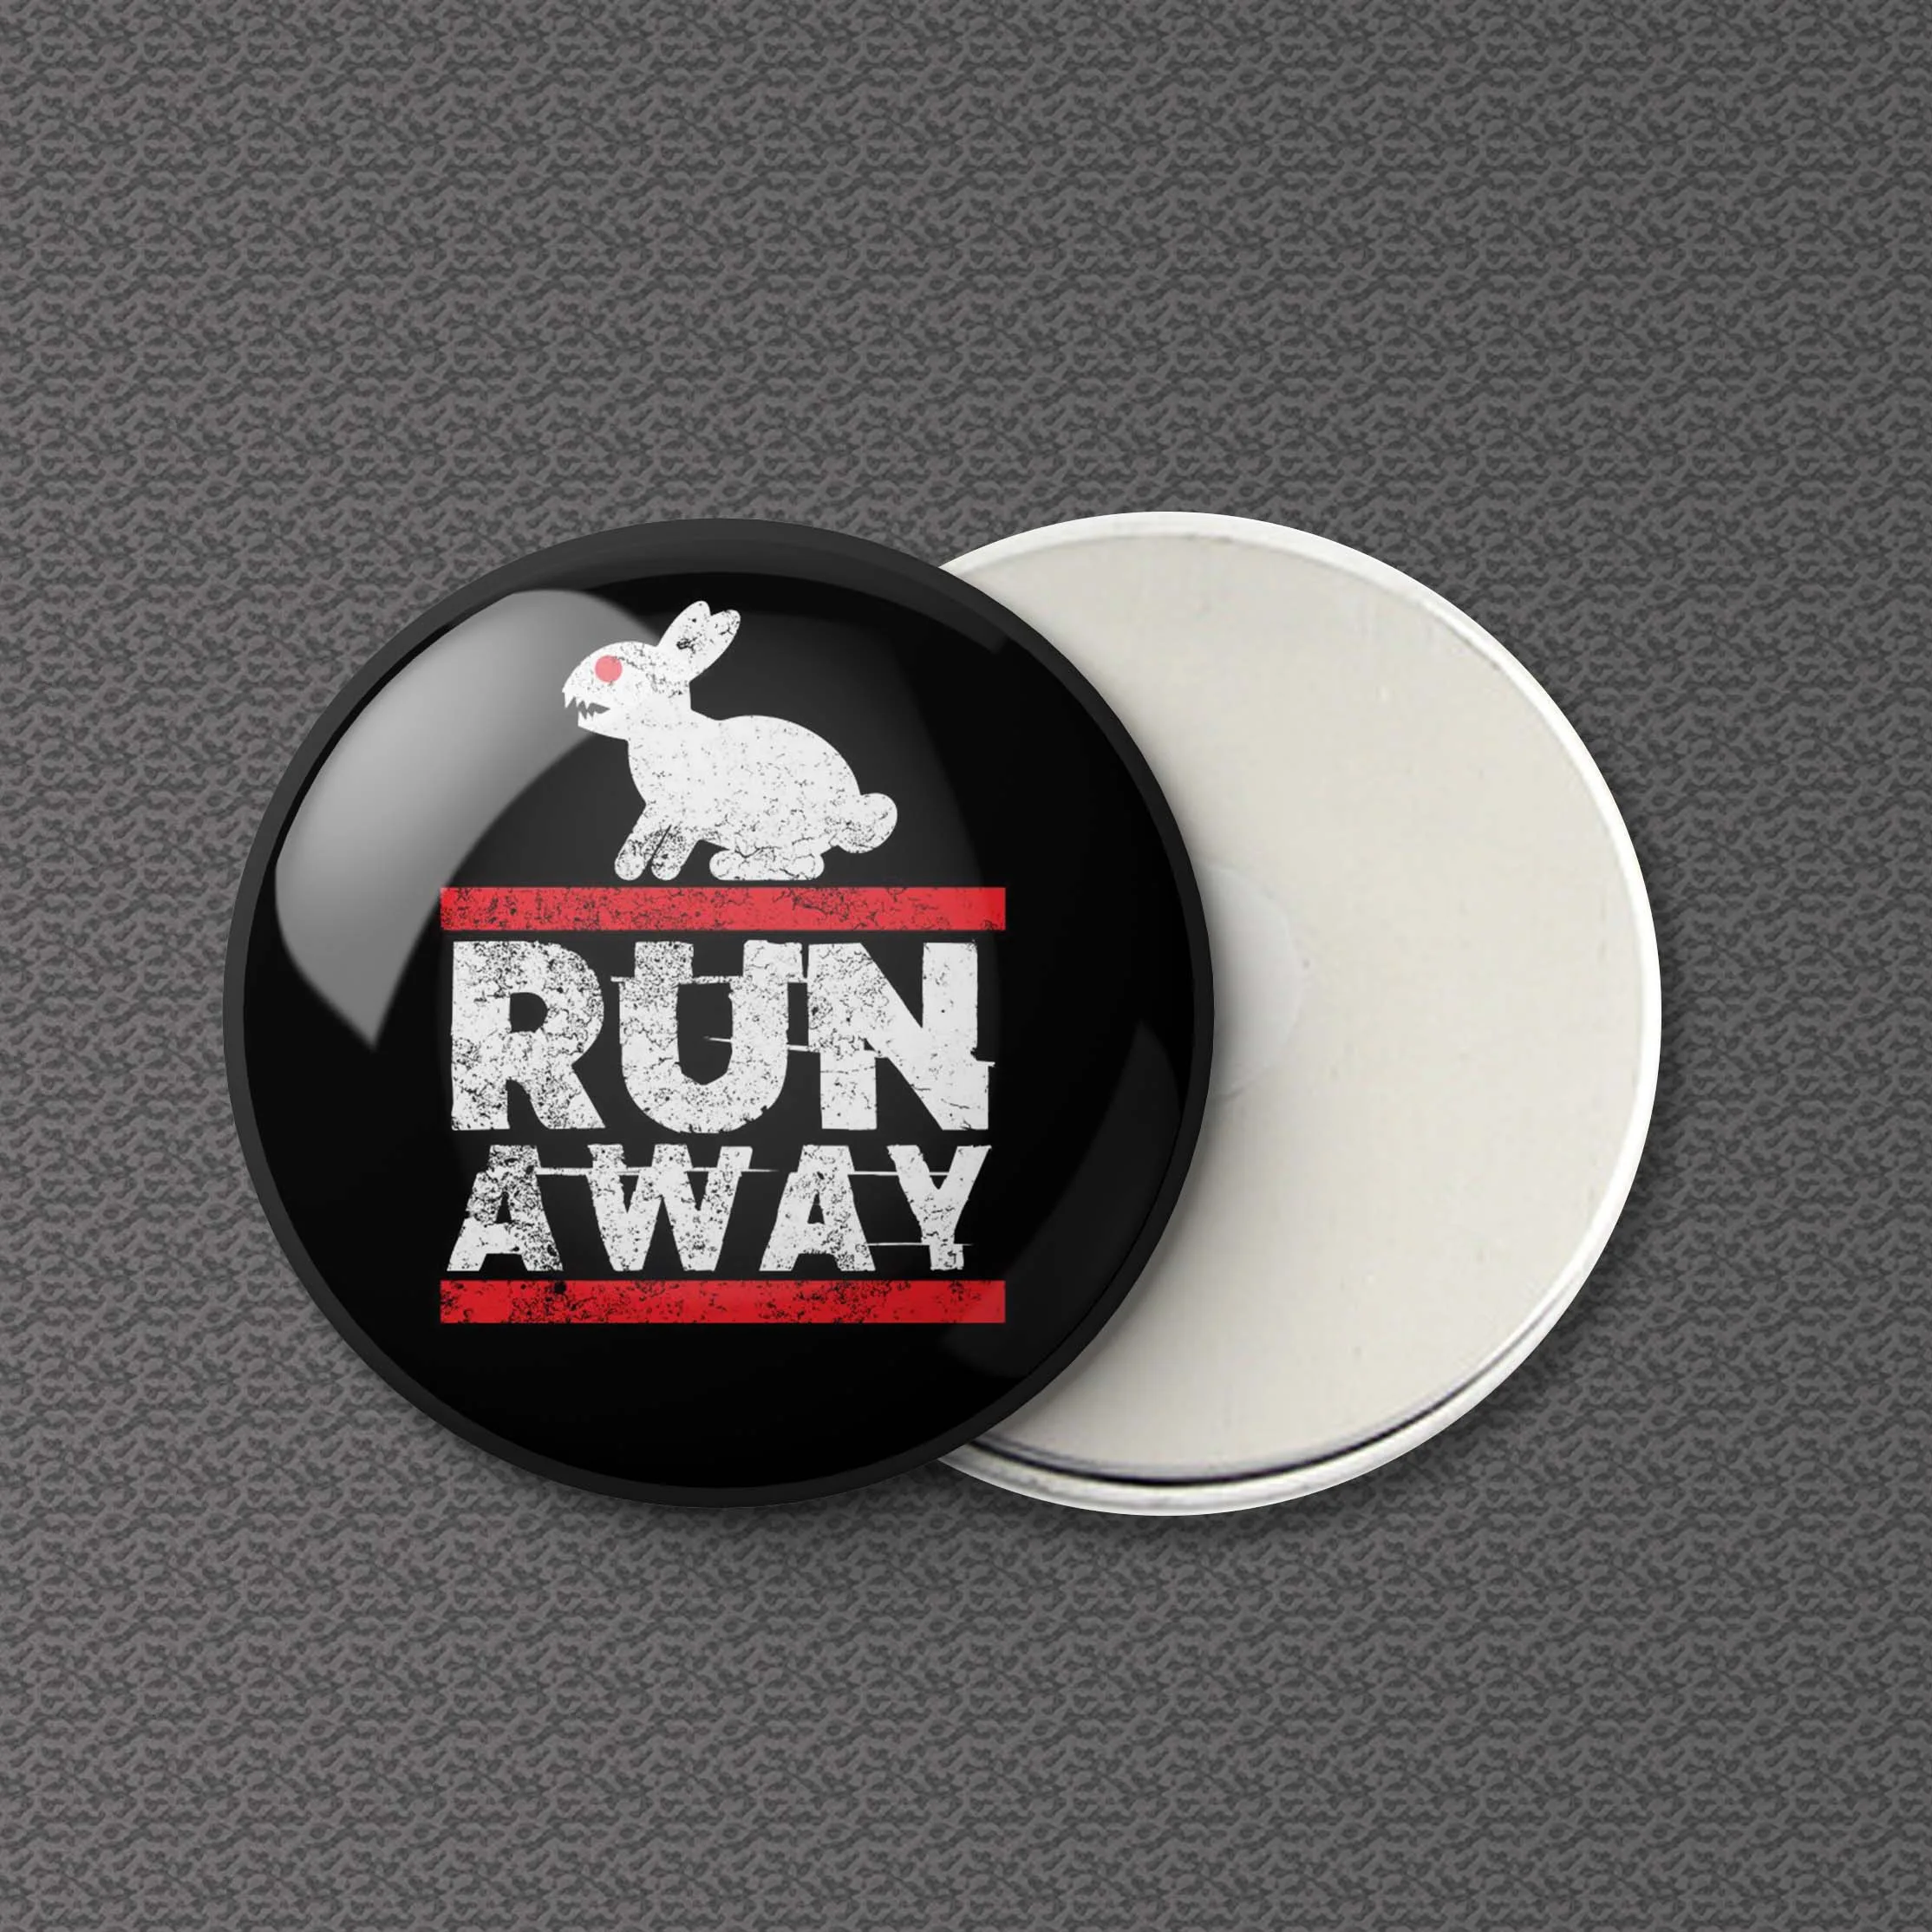 

Run Away Killer Rabbit Grail Quest Refrigerator Magnet Clothes Board Fashion Cute Metal Gift Home Magnetic Kitchen Jewelry